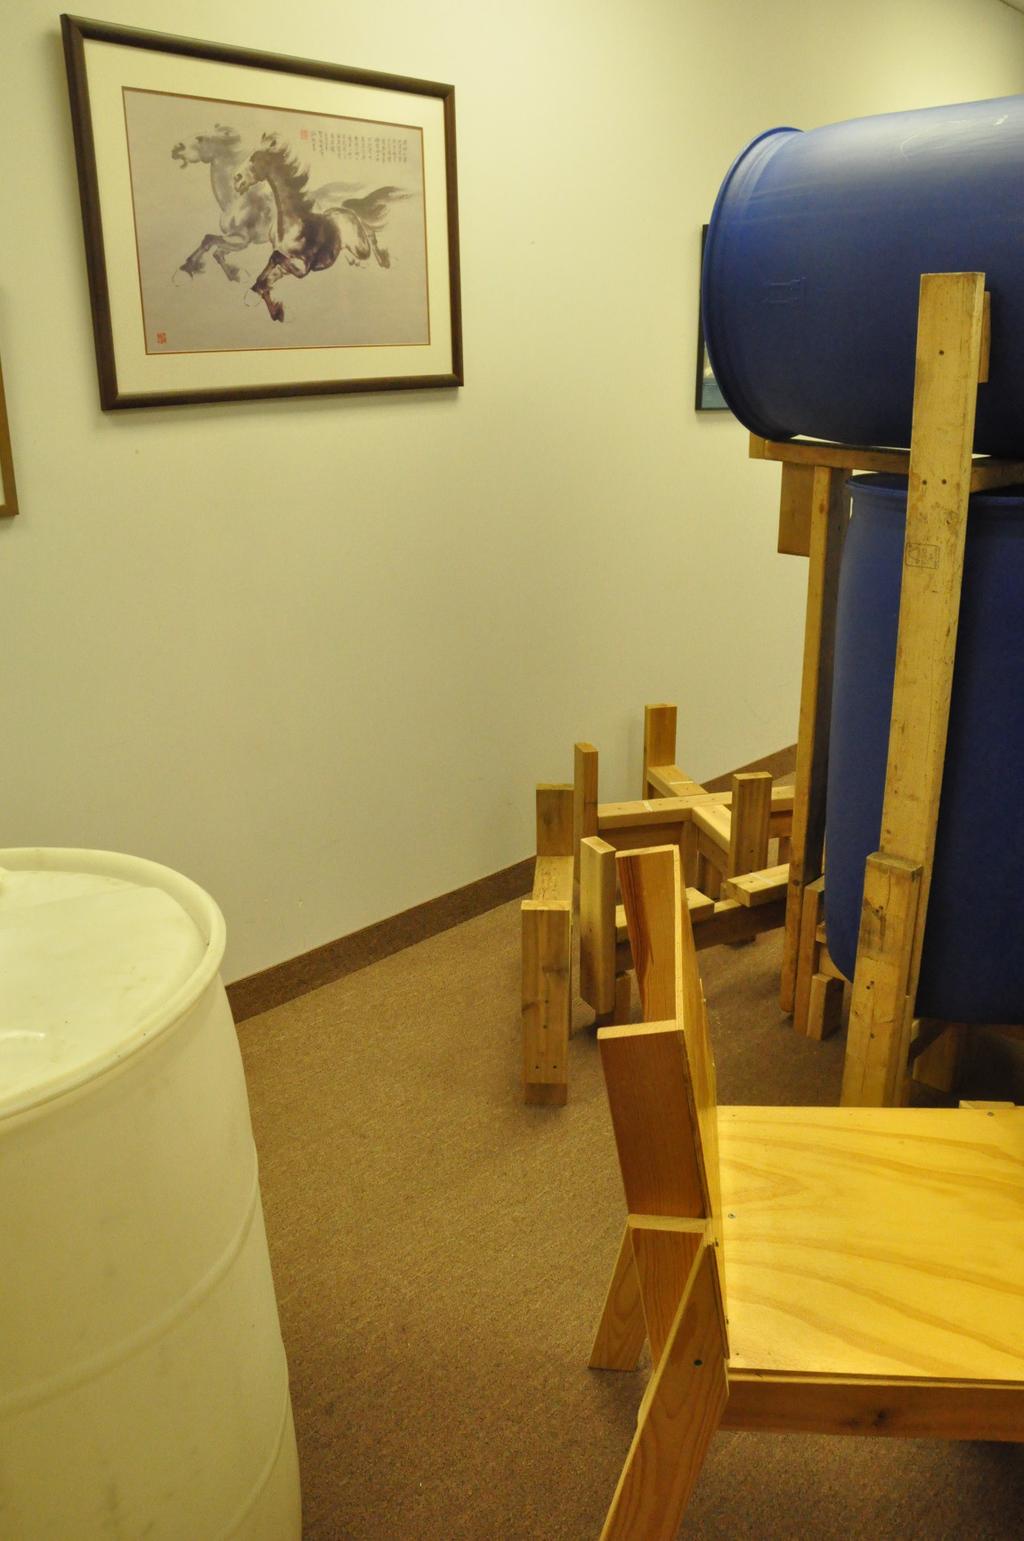 The Barrels and Barrel Stands at the office in